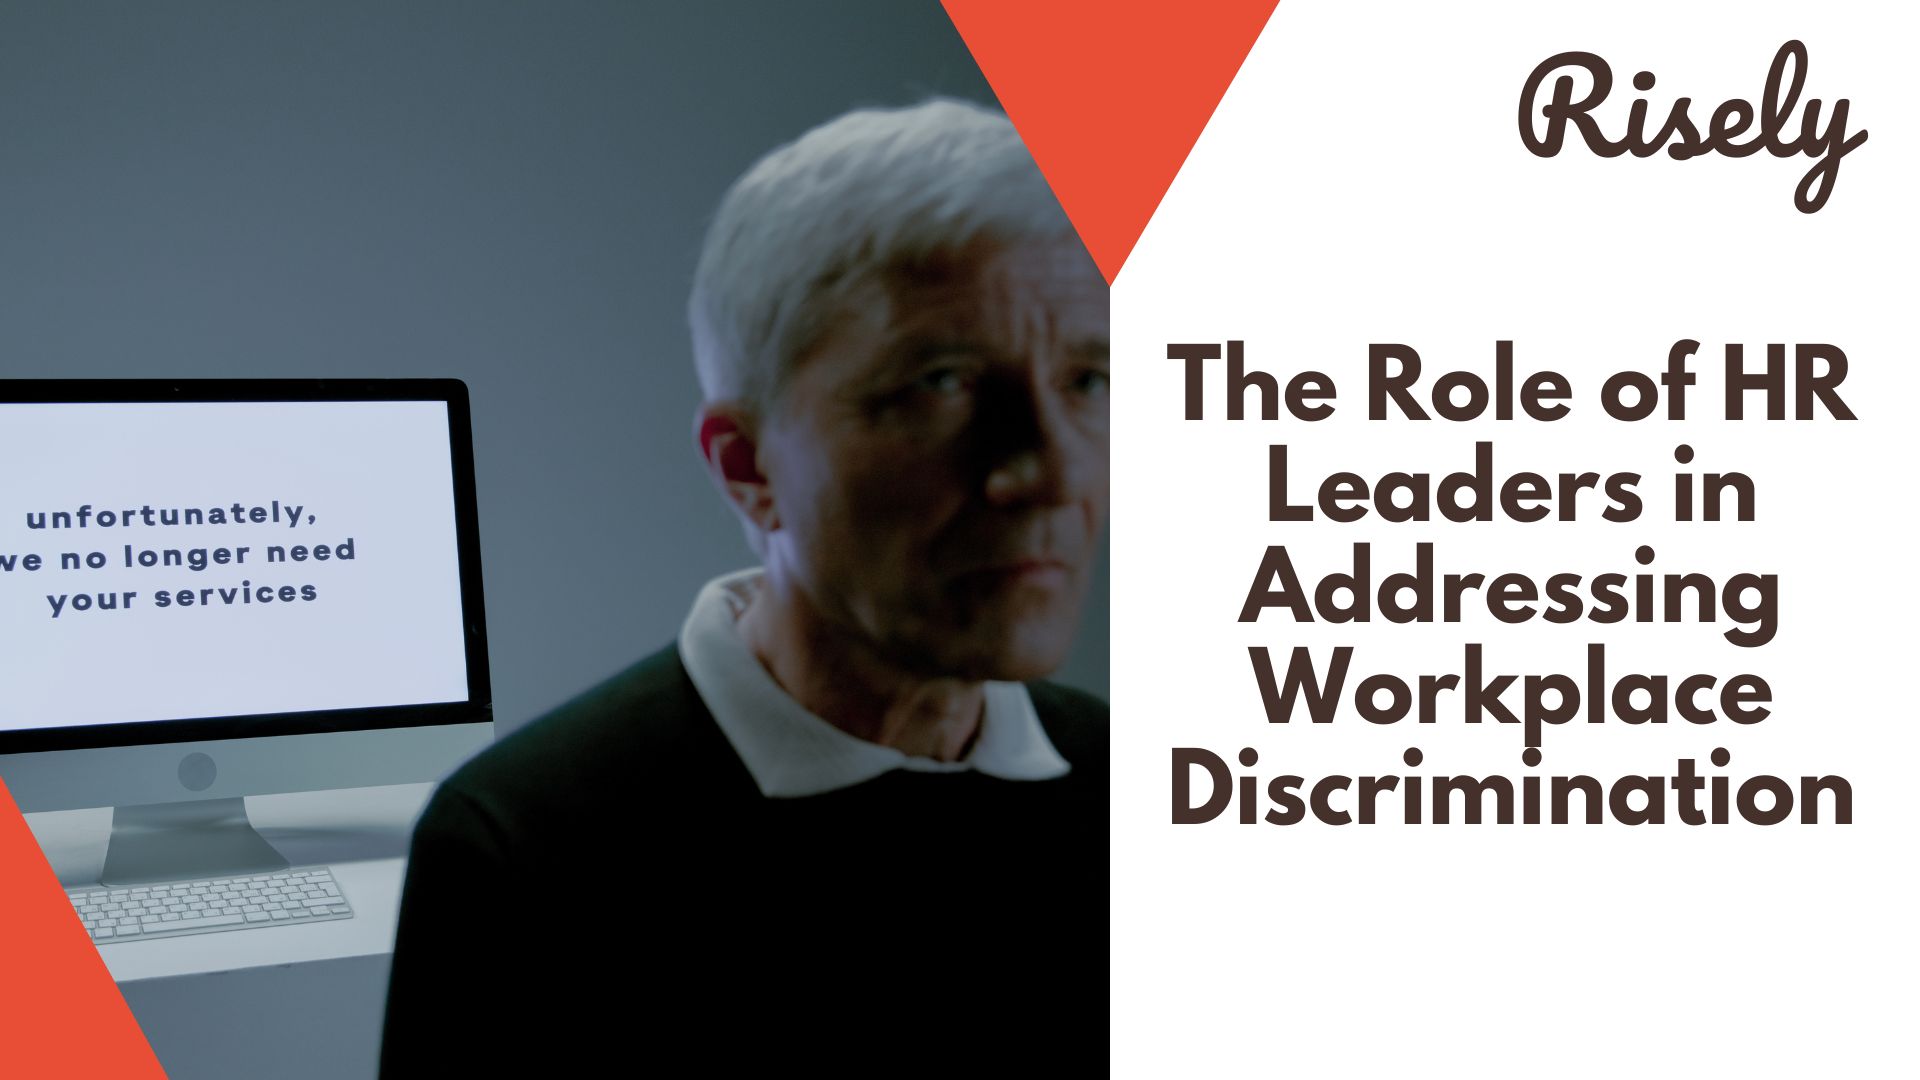 The Role of HR Leaders in Addressing Workplace Discrimination